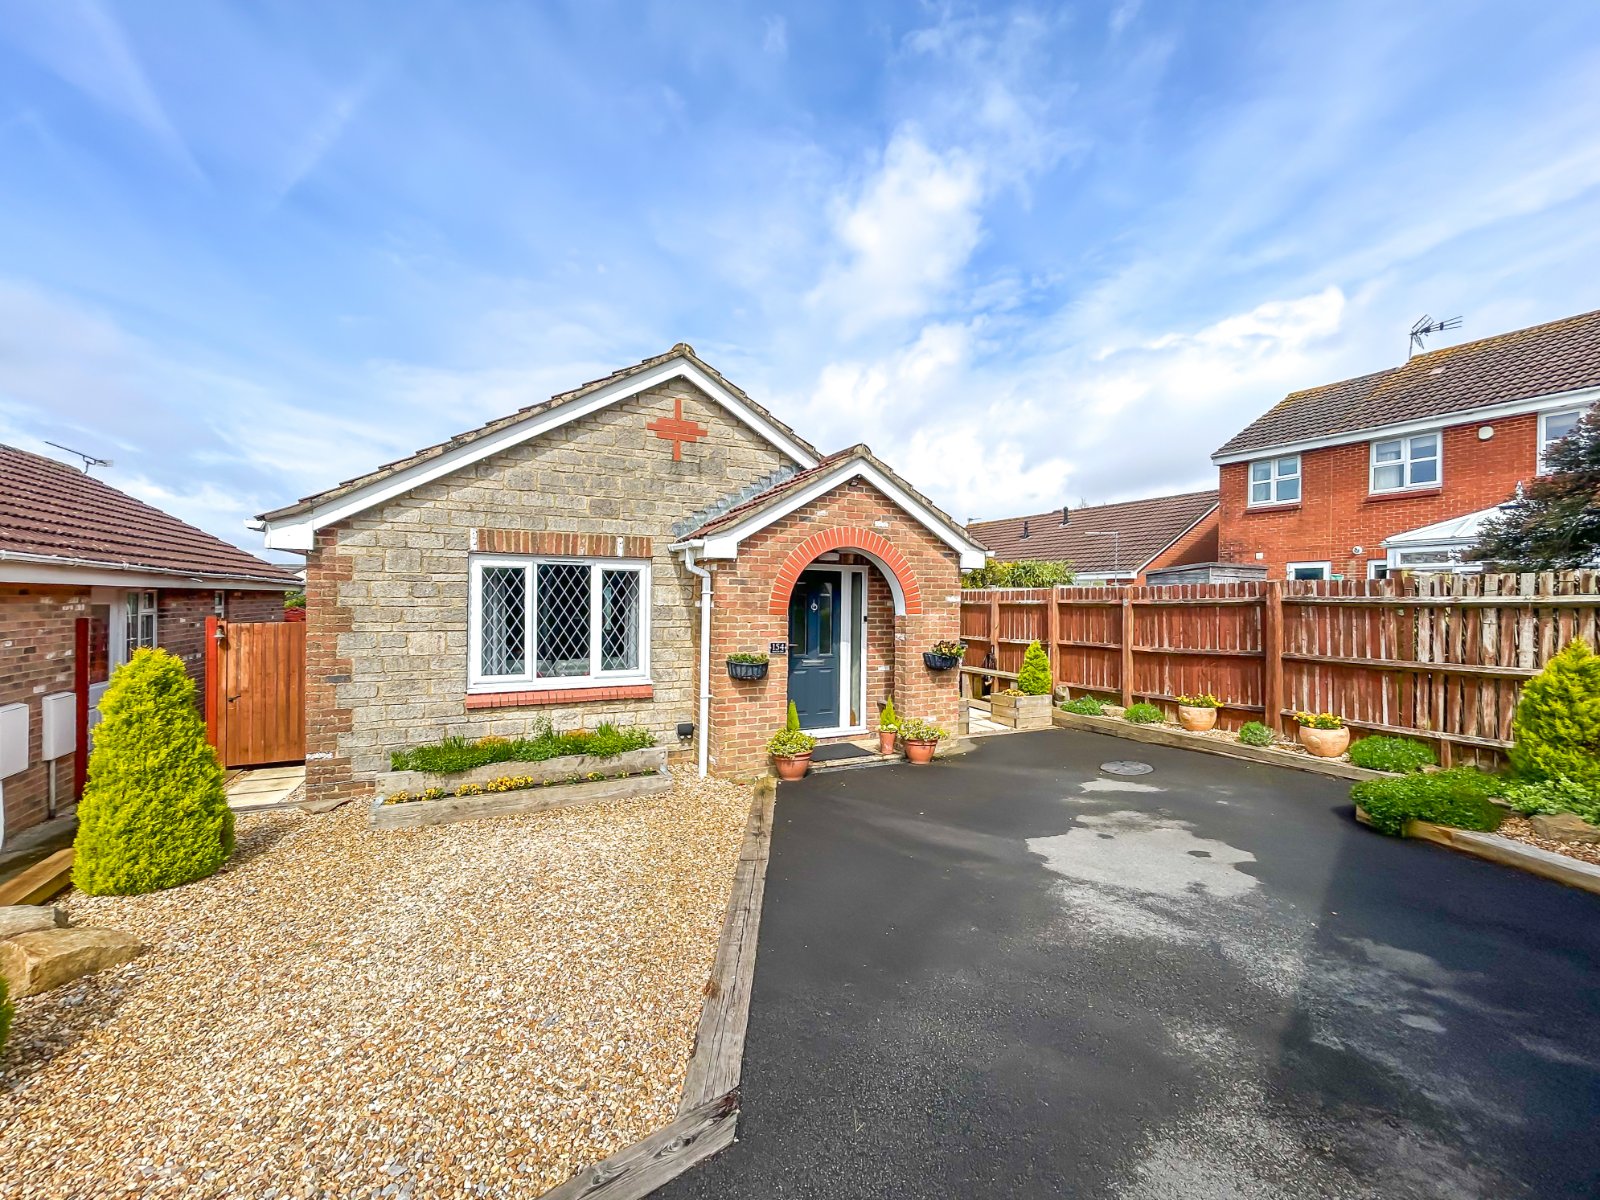 Badger Rise, Portishead, North Somerset, BS20